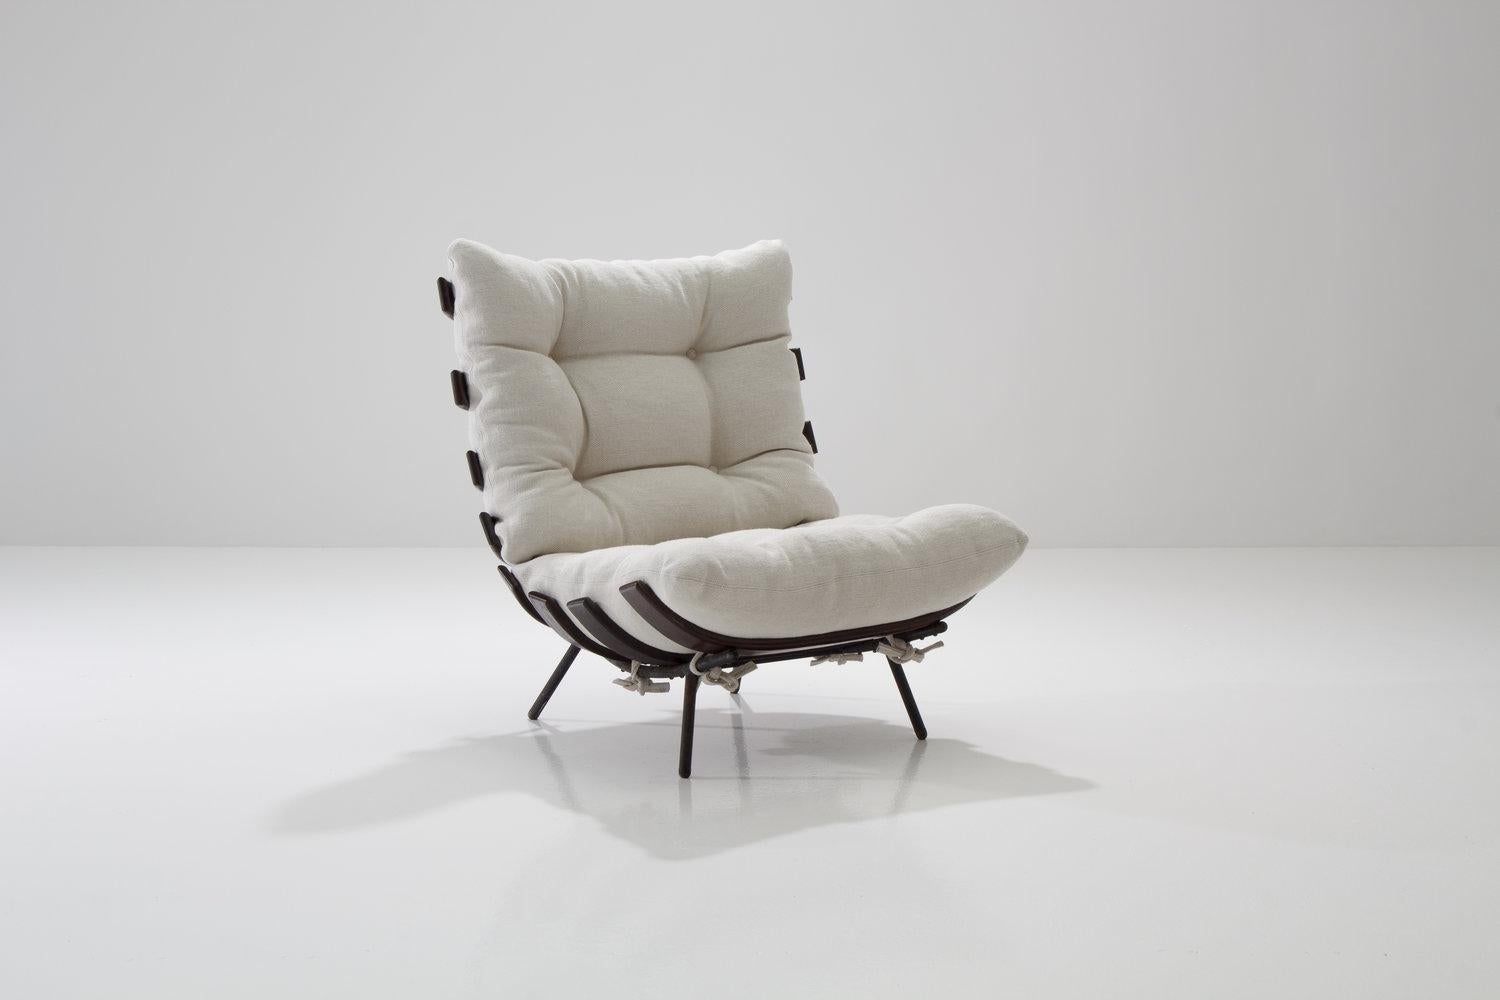 Carlo Hauner and Martin Eisler Costela (‘Rib’) chair for Forma, Brazil 1950s

This characteristic chair by Carlo Hauner and Martin Eisler is one of the icons of Brazilian Mid-Century Modern Design. The name ‘Costela’ which translates as rib, is